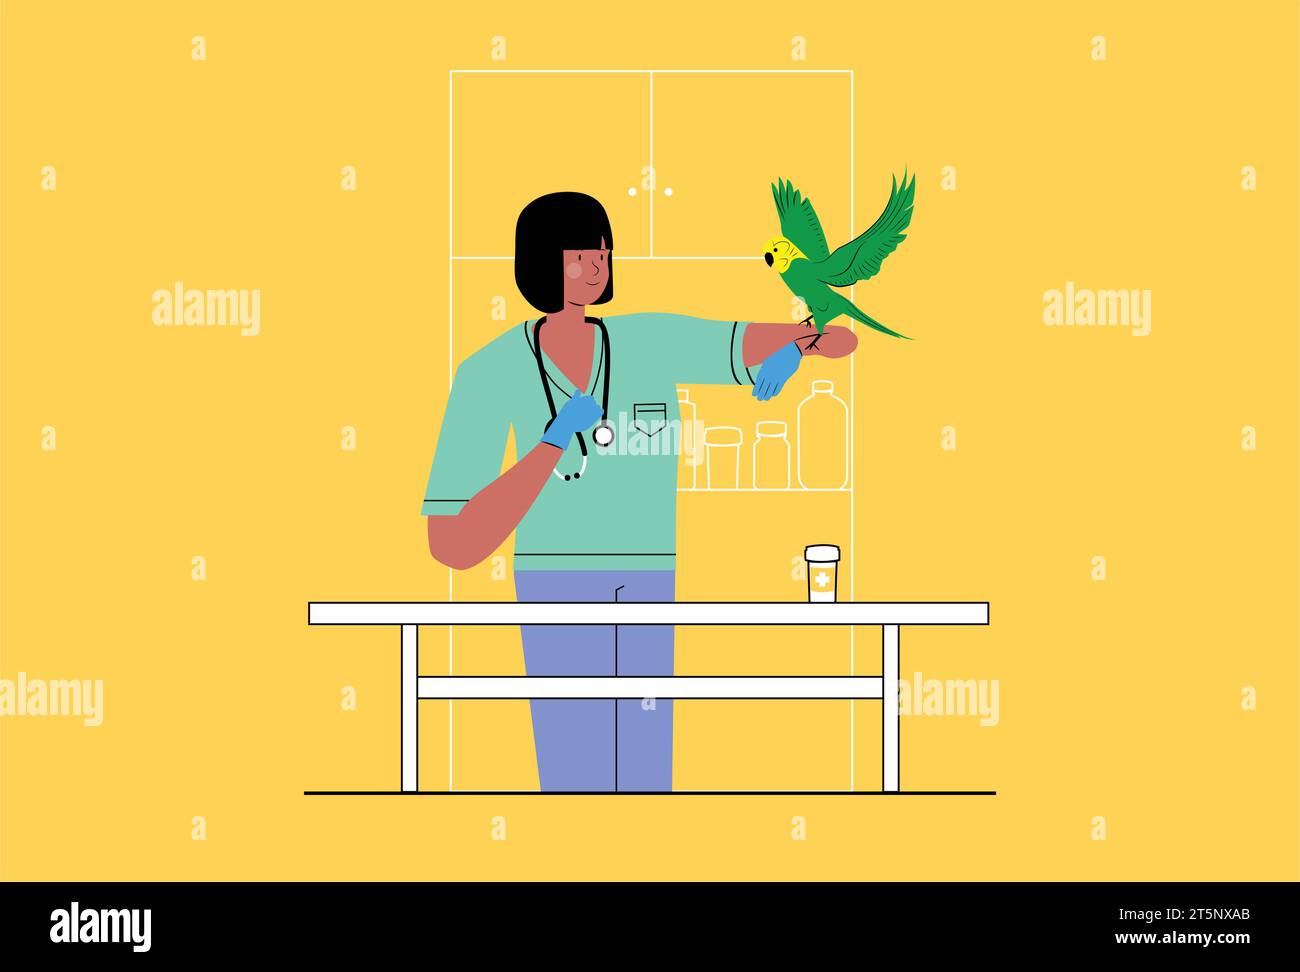 Veterinarian Holding Bird Above Vet Table In Veterinary Hospital Care Facility, Clinic, Check-Up, Visit Stock Vector